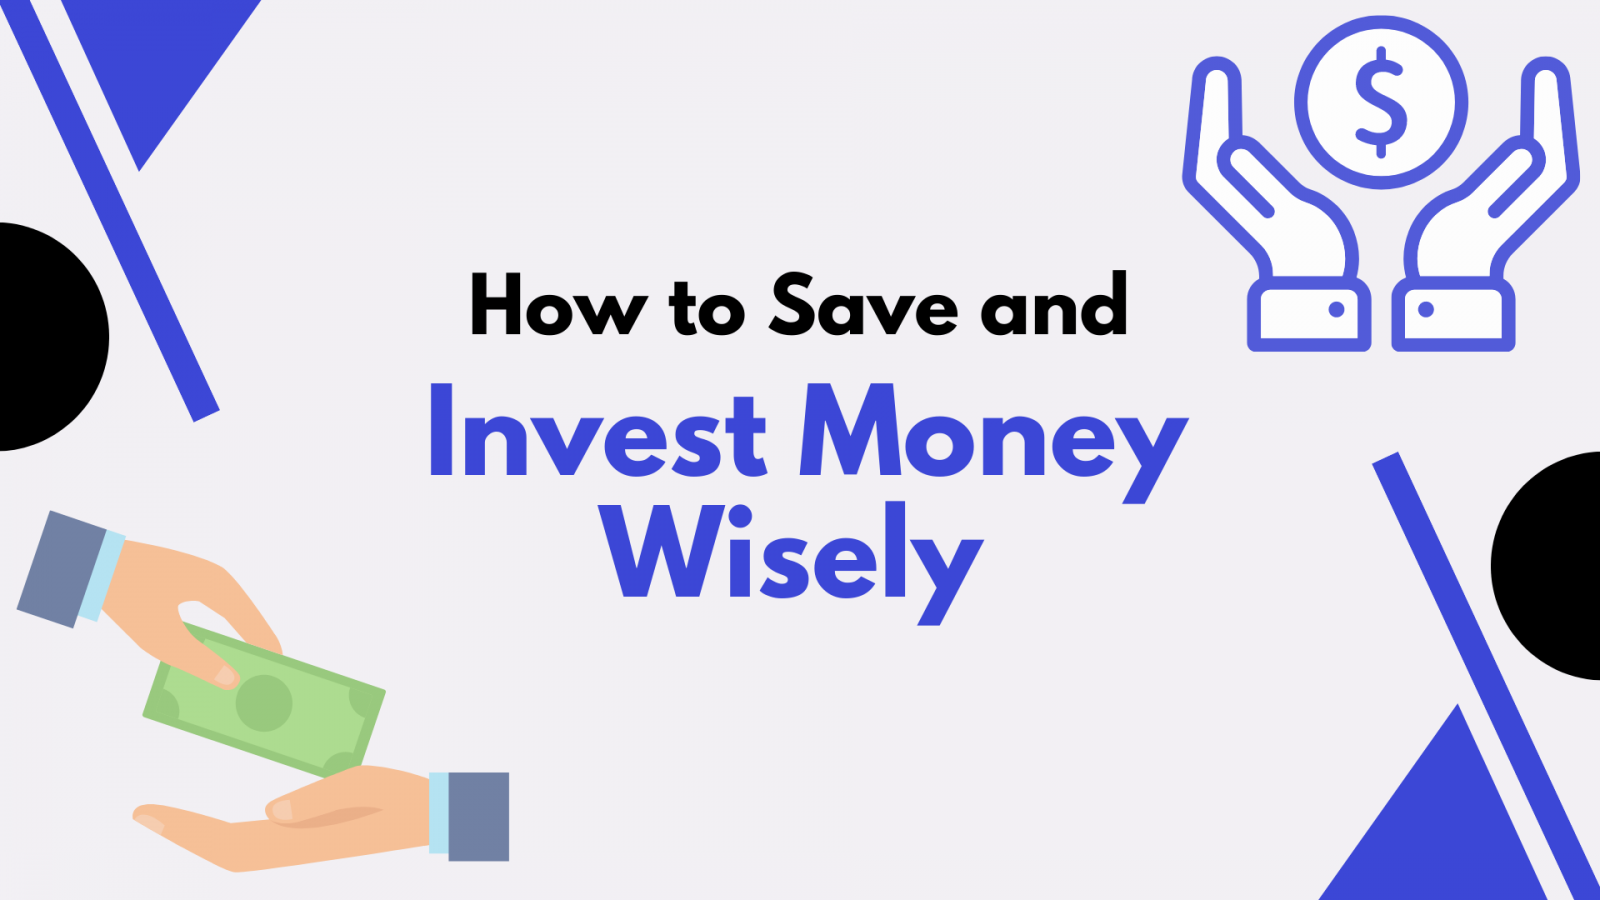 How to save and invest money wisely